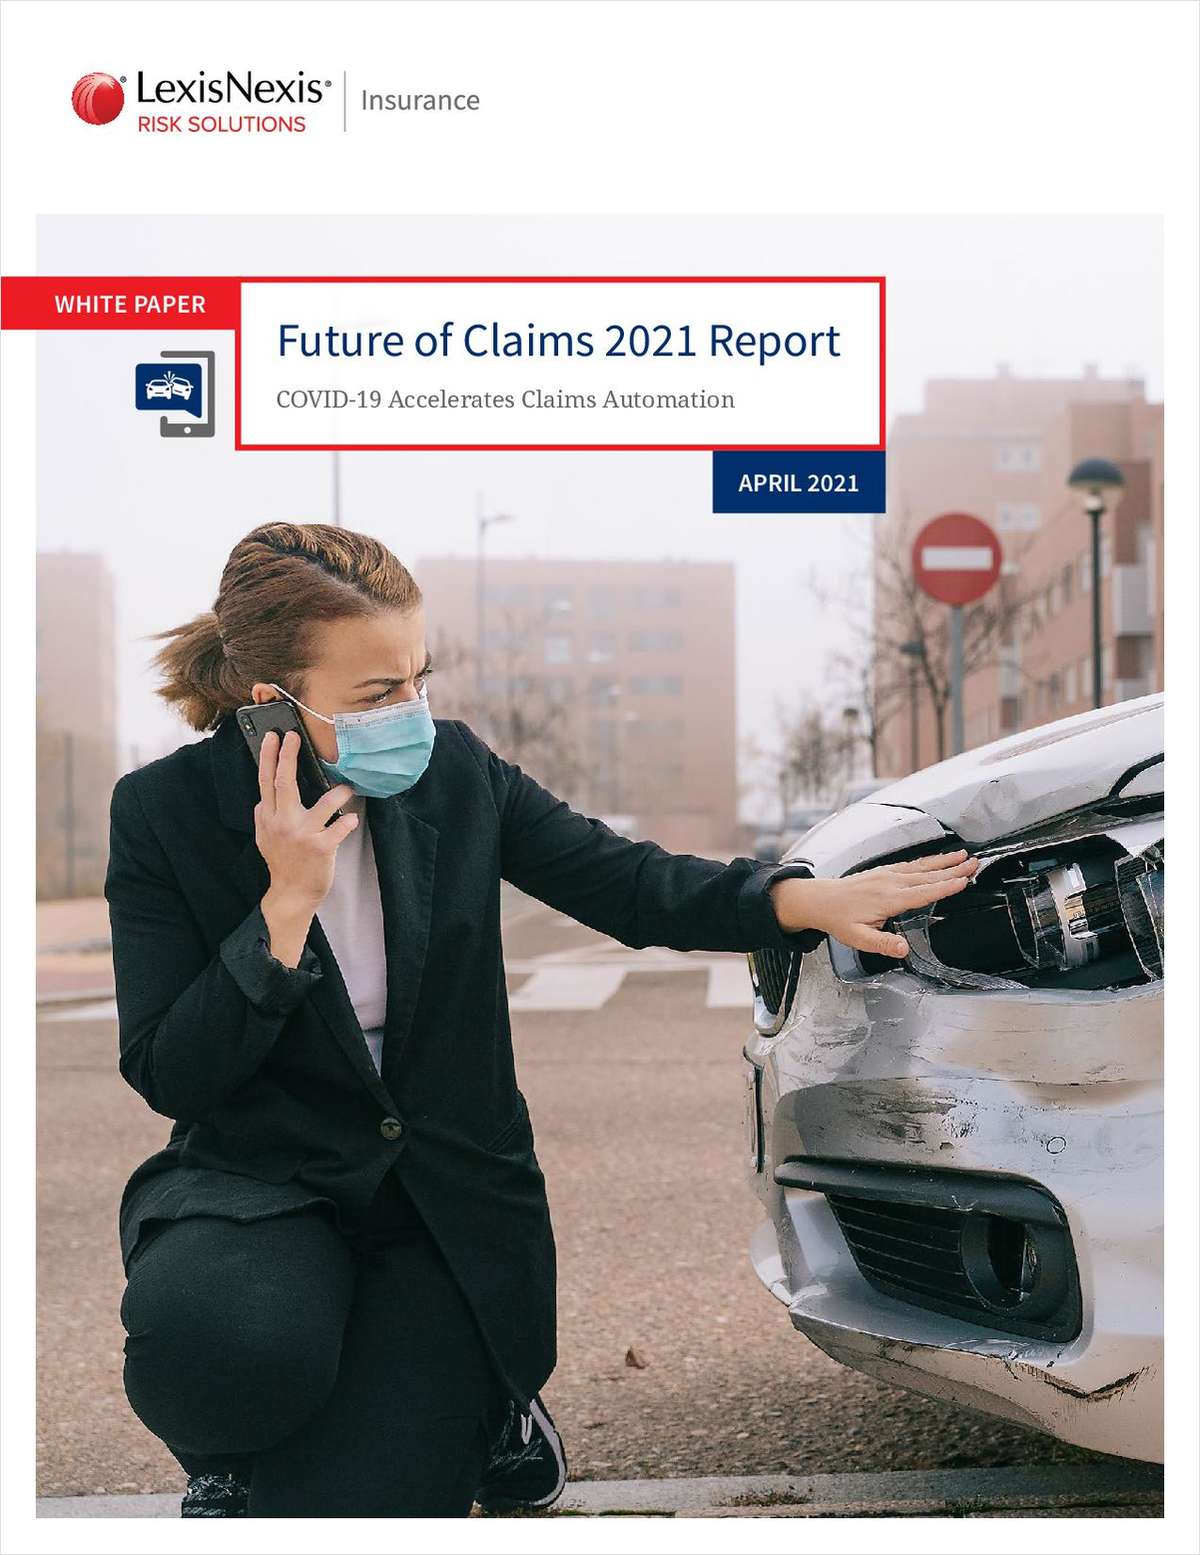 Future of Claims 2021 Report: COVID-19 Accelerates Claims Automation